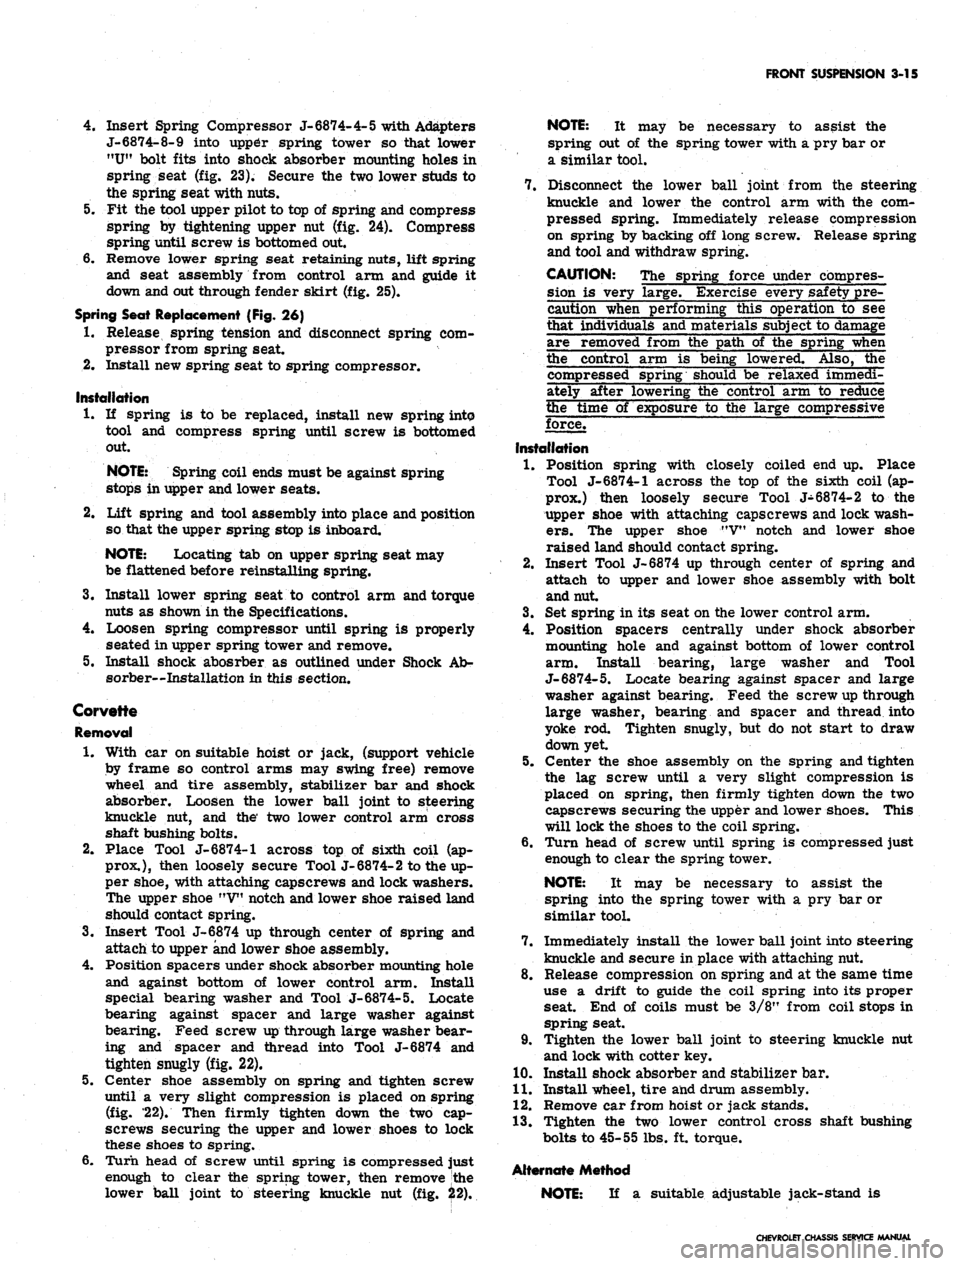 CHEVROLET CAMARO 1967 1.G Chassis Workshop Manual 
FRONT SUSPENSION 3-15

4.
 Insert Spring Compressor J-
 6874-
 4-
 5 with Adapters

J-6874-8-9 into upp^r spring tower so that lower

MU"
 bolt fits into shock absorber mounting holes in

spring seat